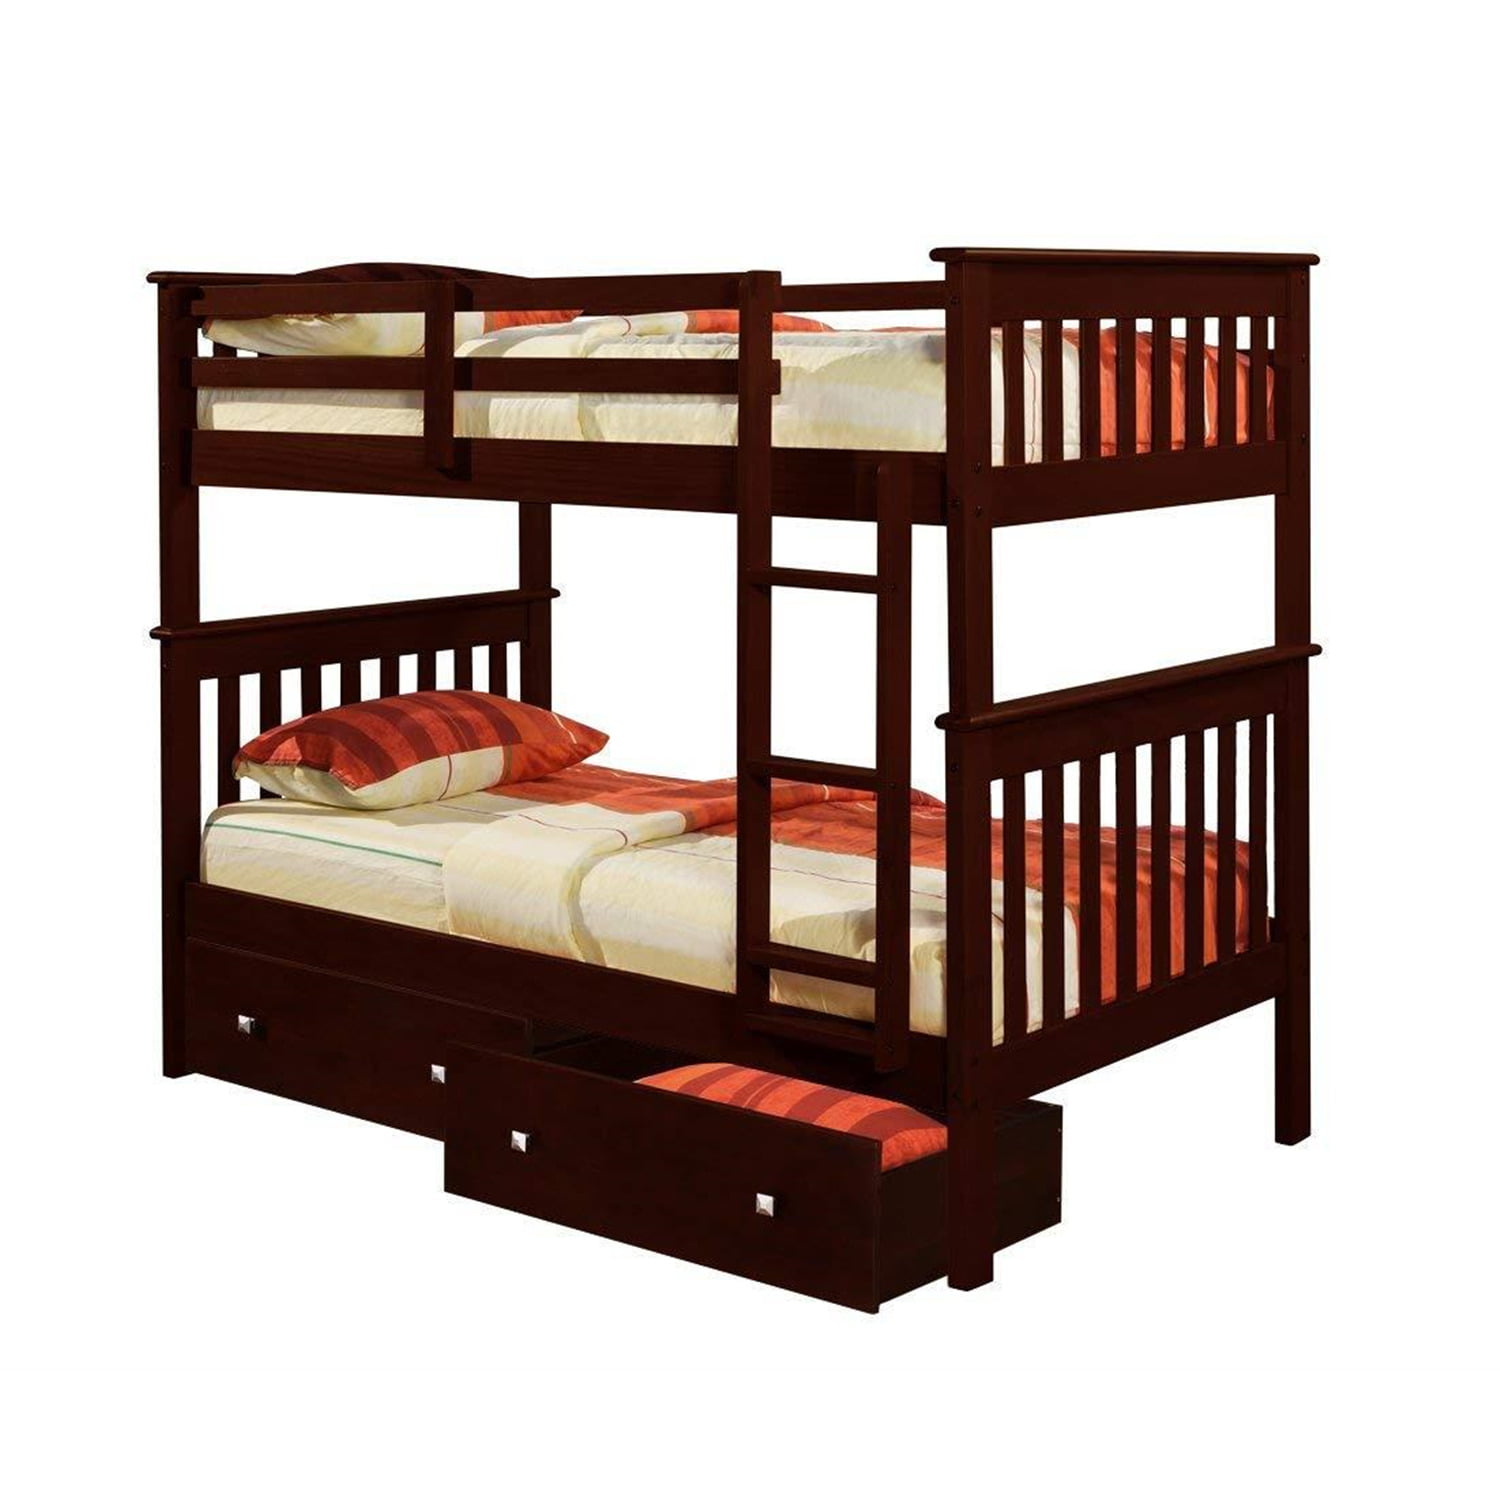 Donco Kids Mission Bunk Bed Color Dark, Bunk Bed With Drawers Underneath